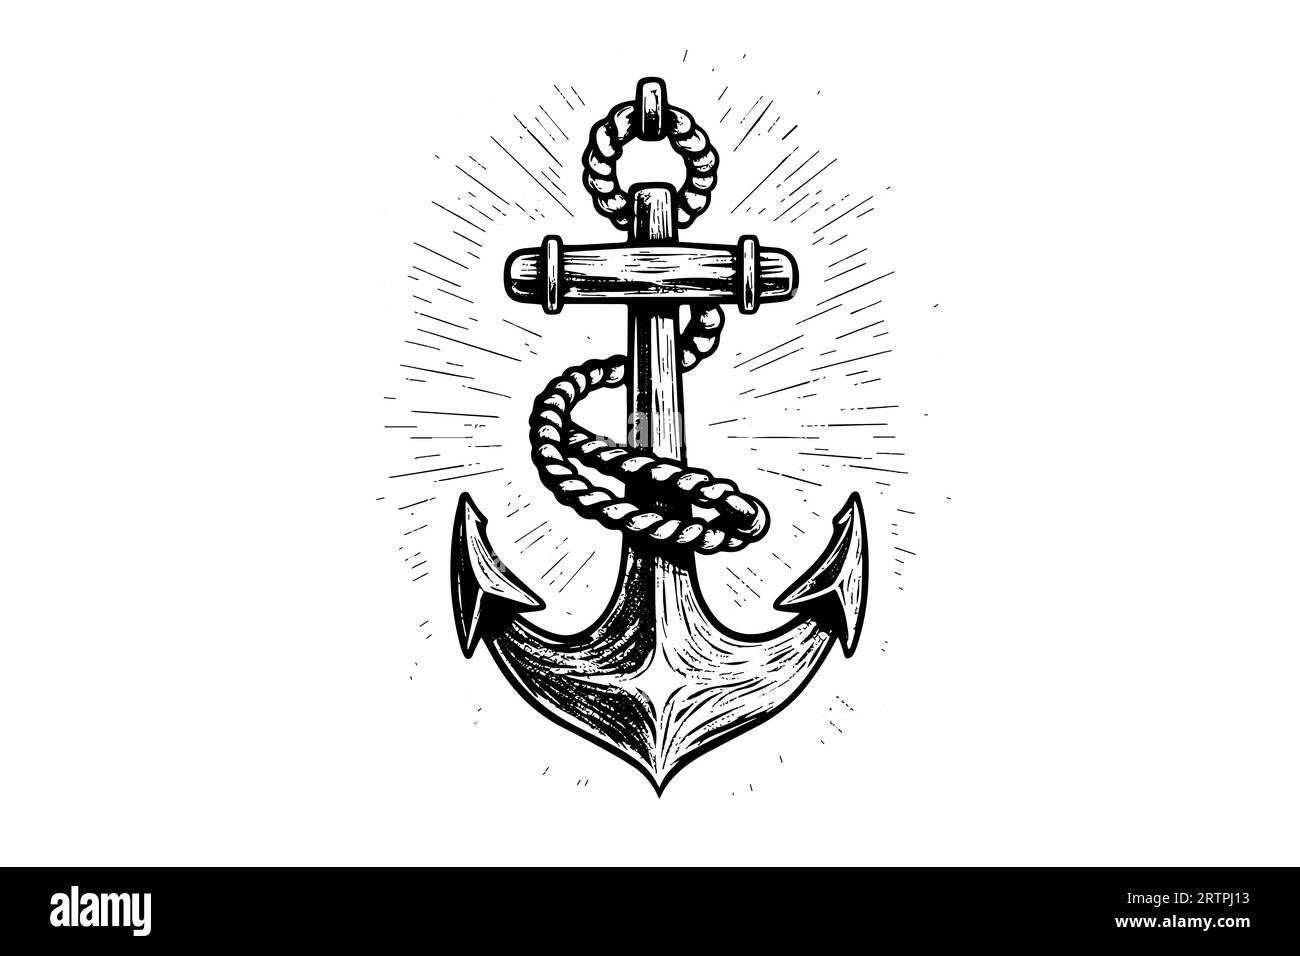 Ship sea anchor and rope in vintage engraving style. Sketch hand drawn vector illustration. Stock Vector